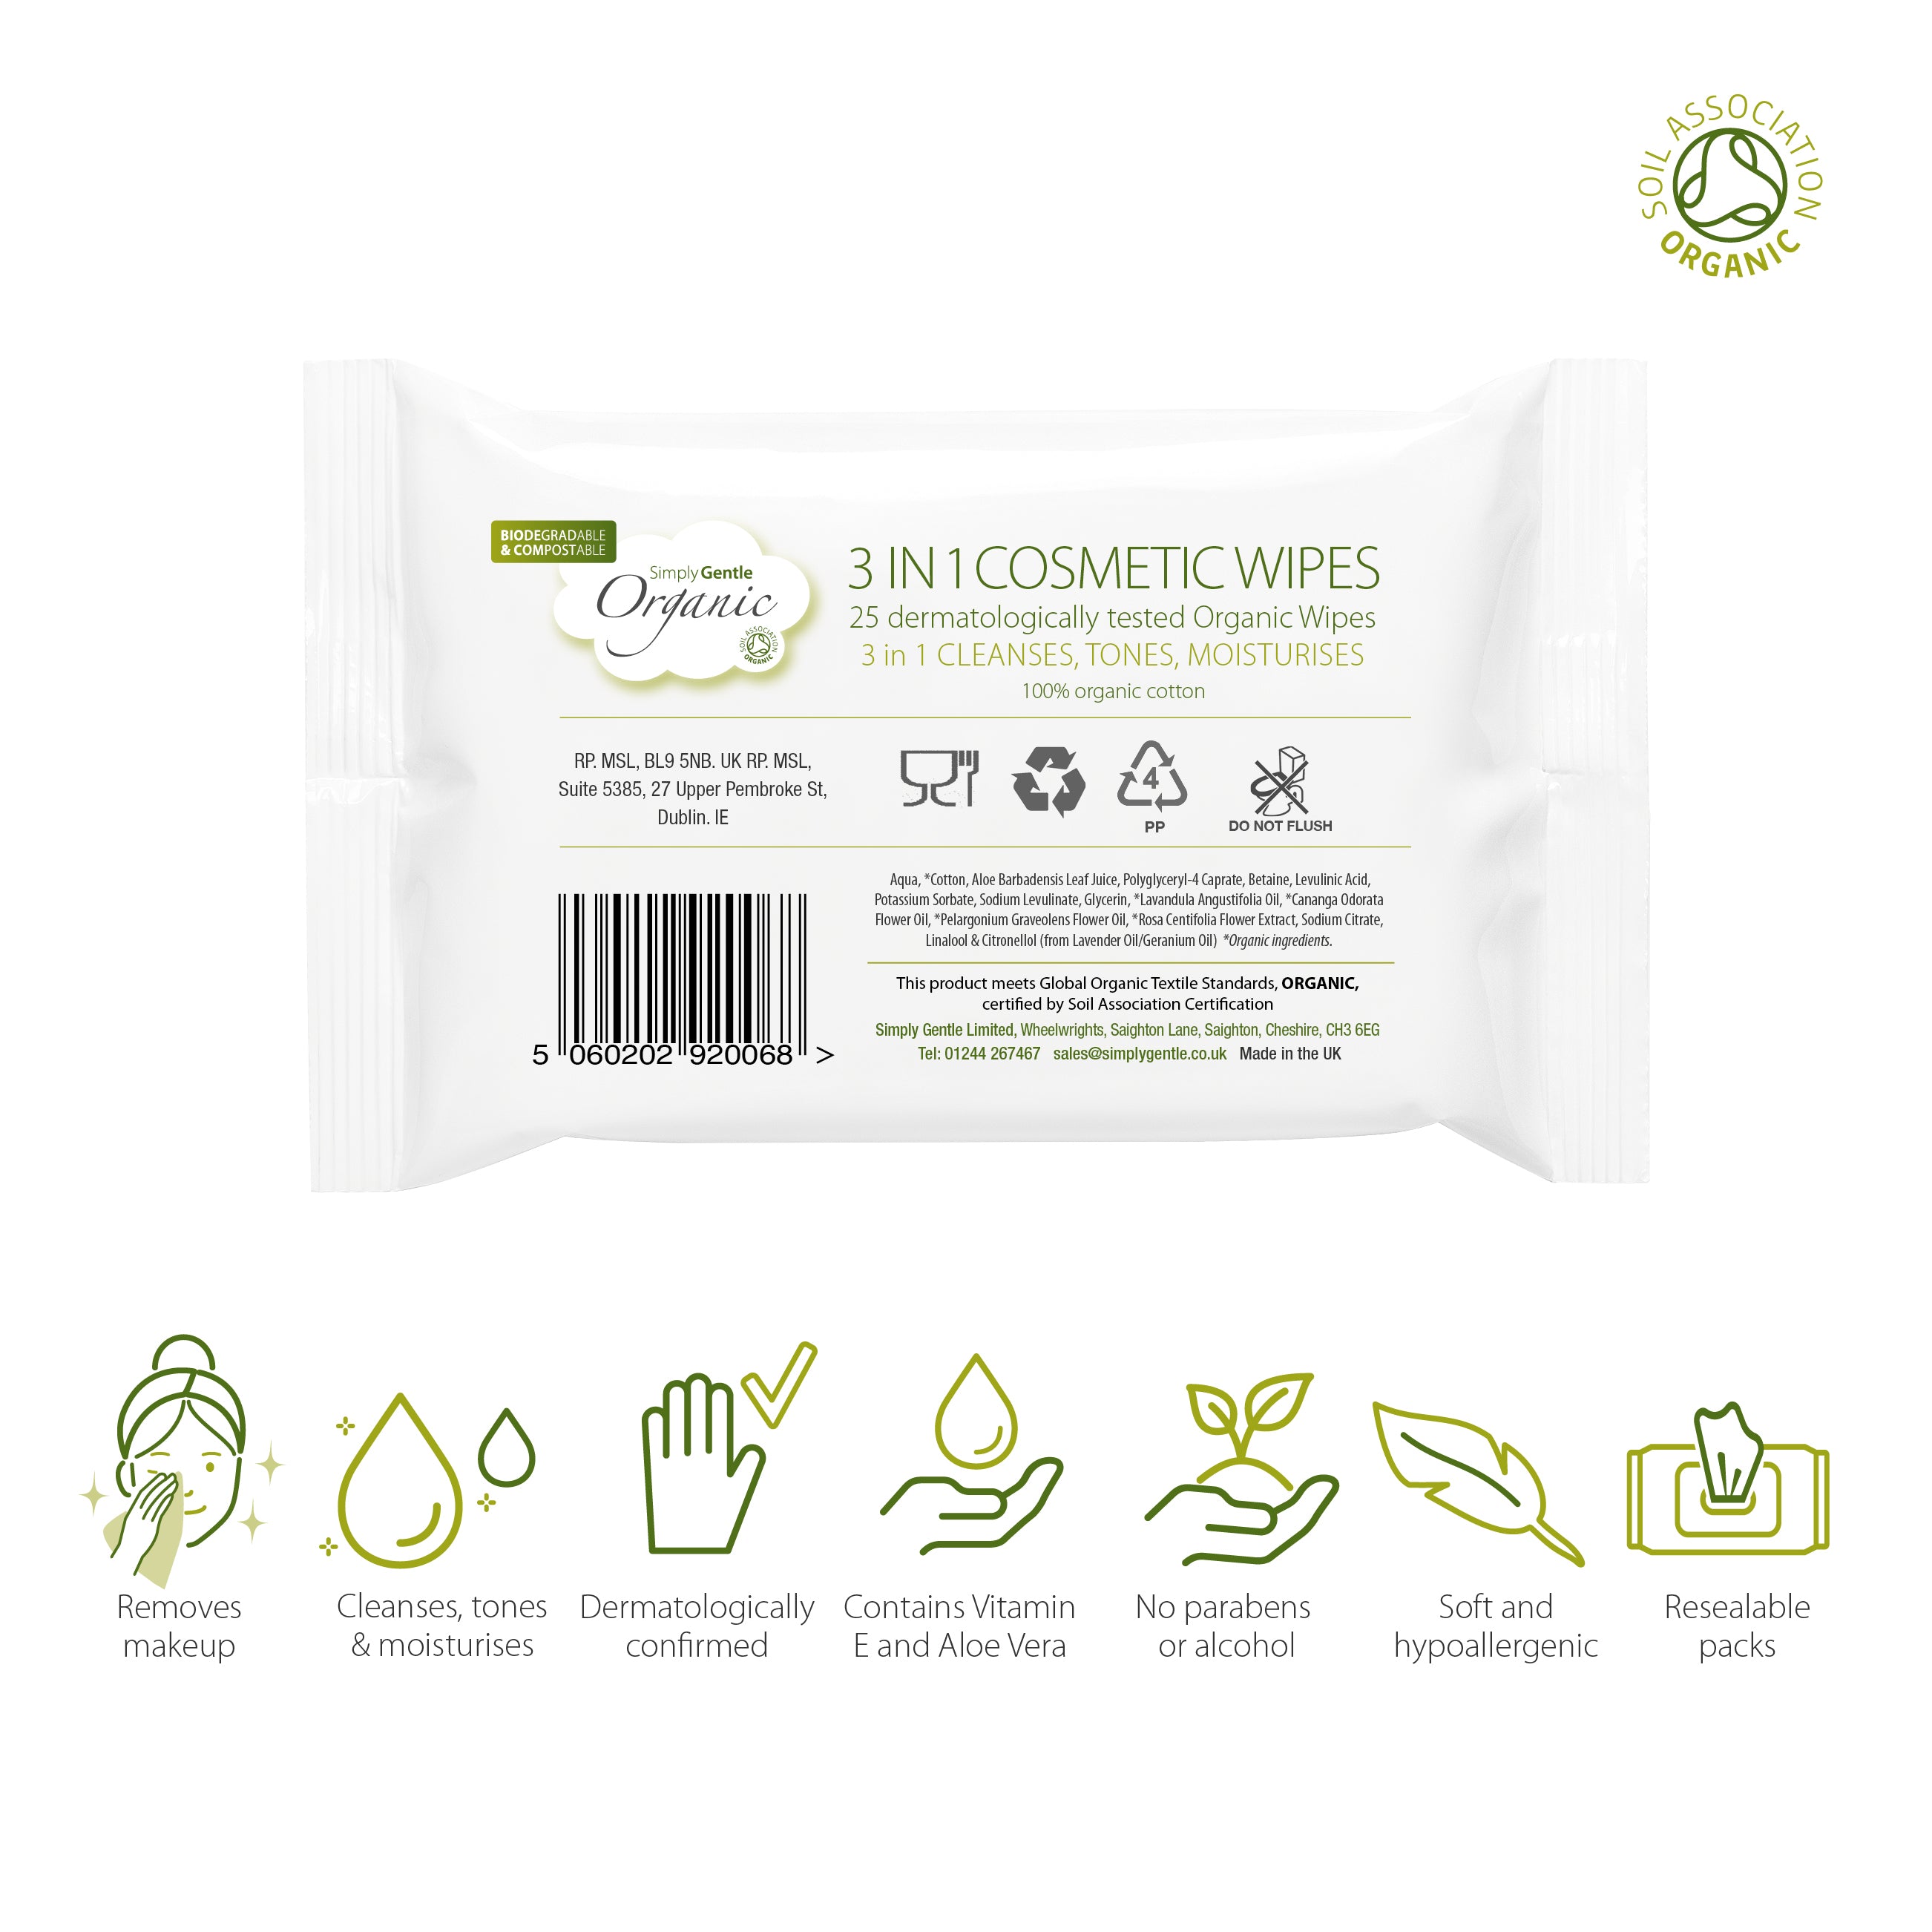 Simply Gentle Organic 3 in 1 Cosmetic Wipes